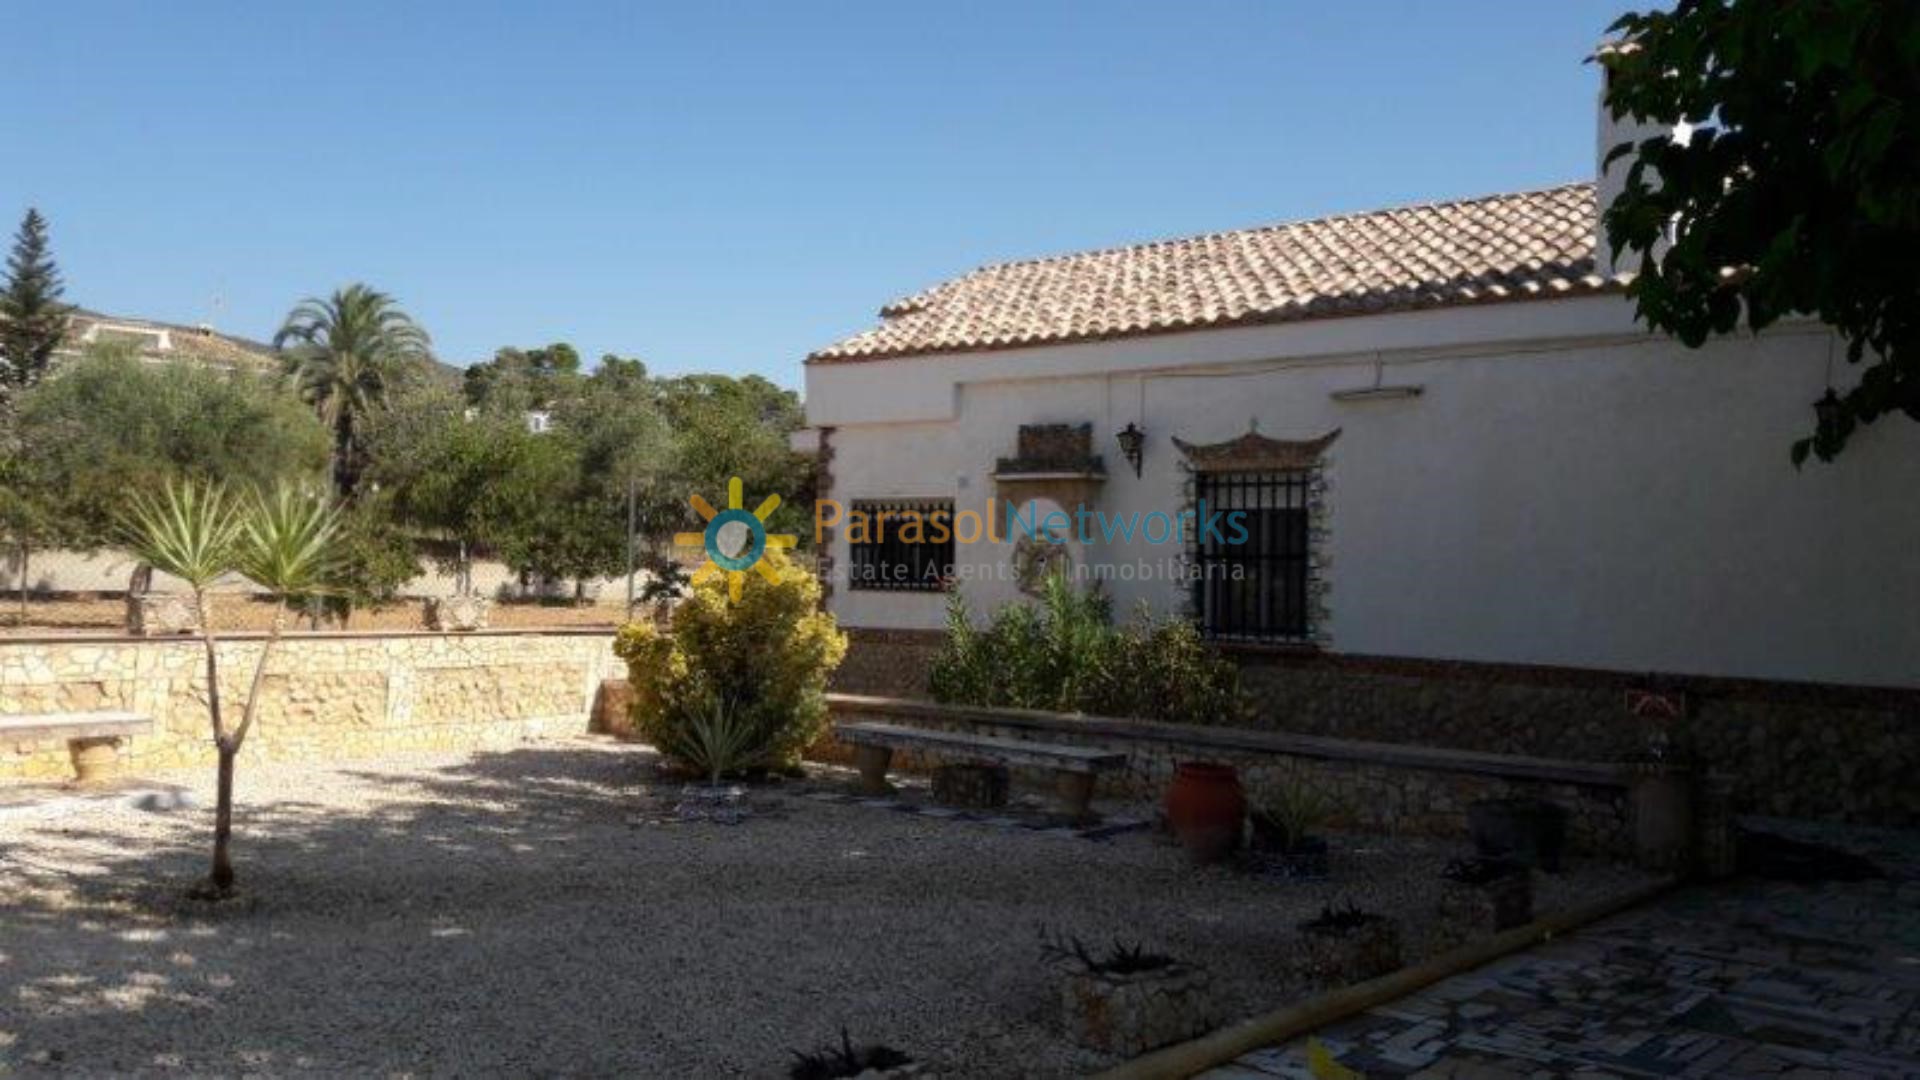 Villa for sale in Ontinyent – Ref: 3325